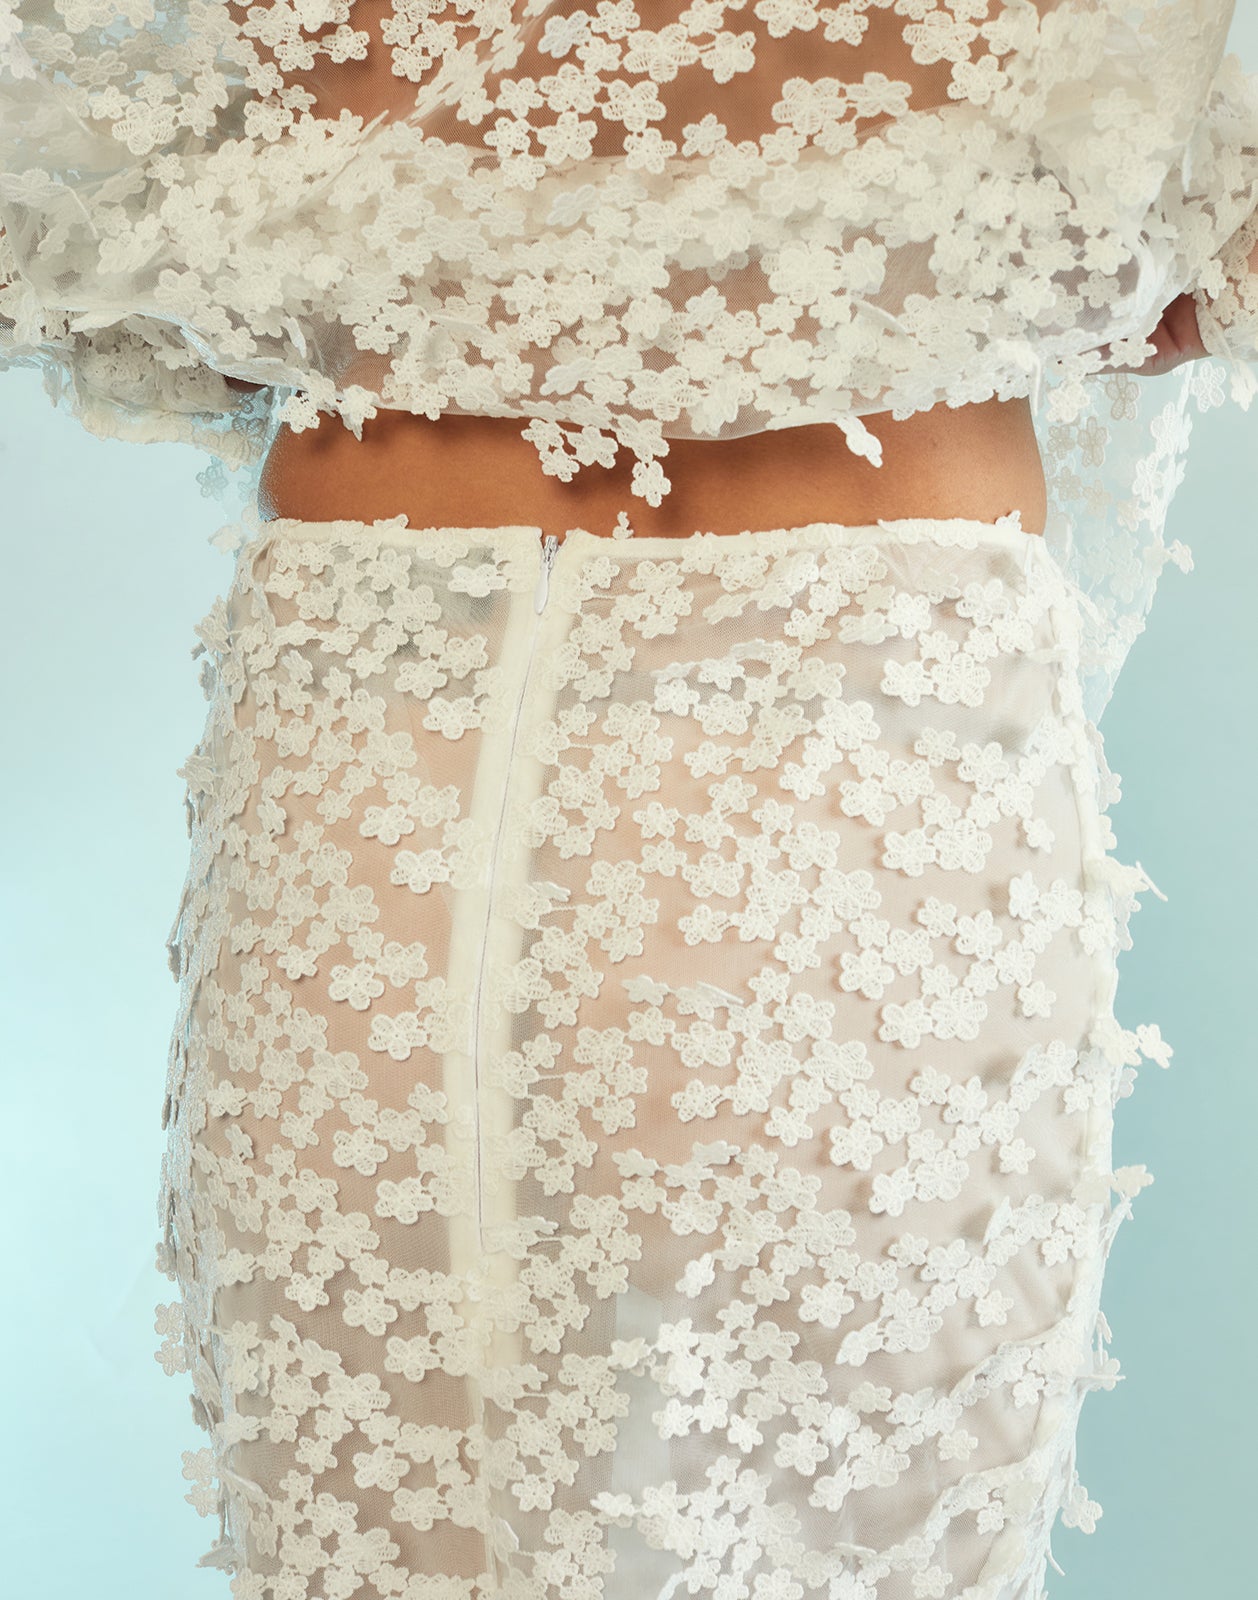 3D Embroidered Tulle Skirt